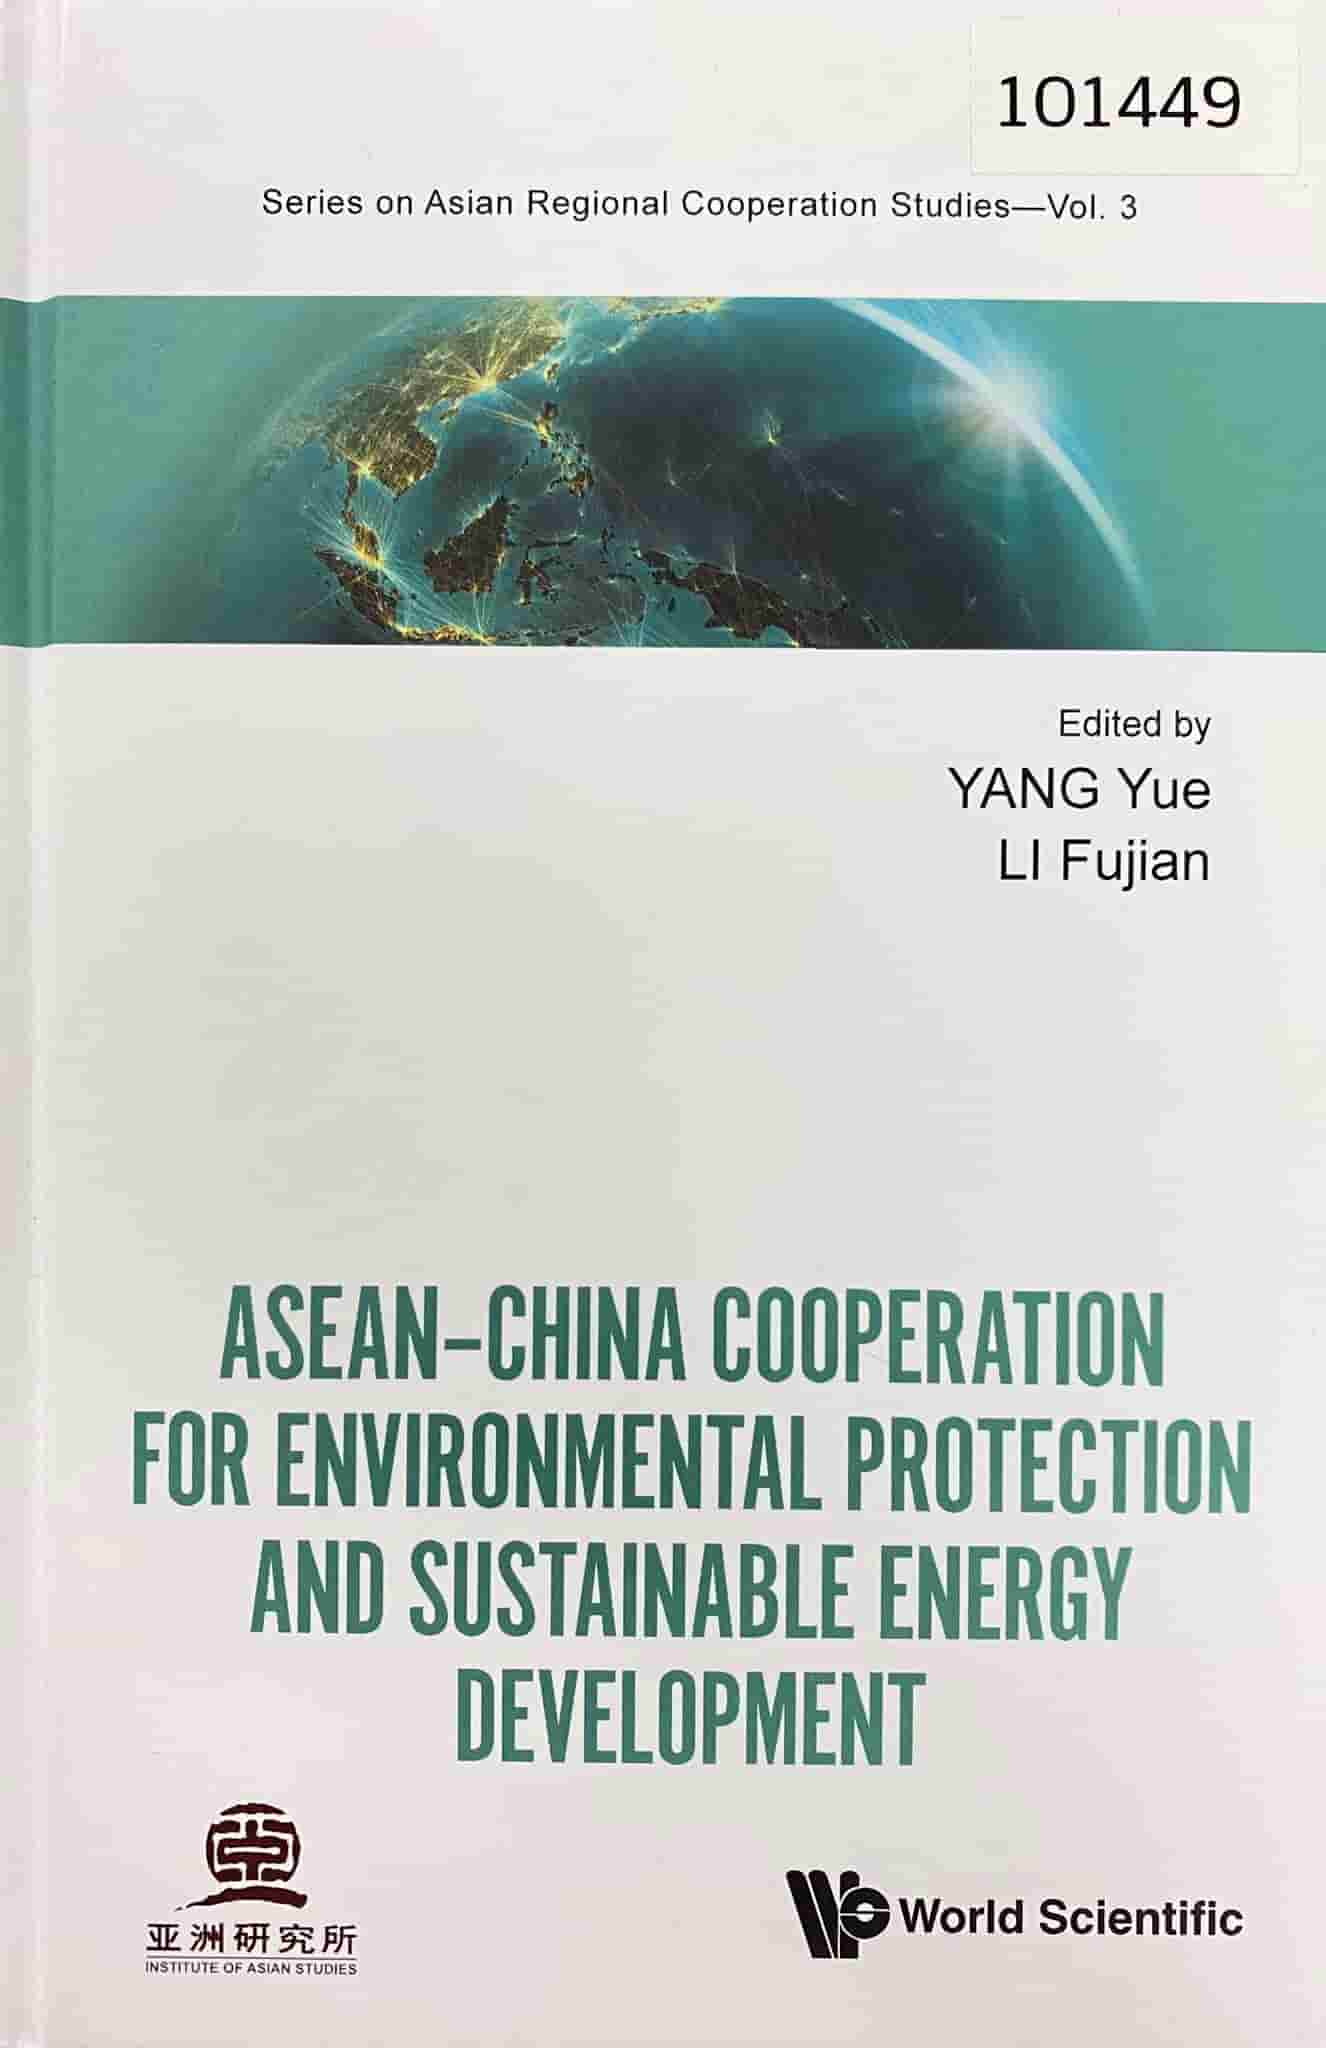 ASEAN-China cooperation for environmental protection and sustainable energy development